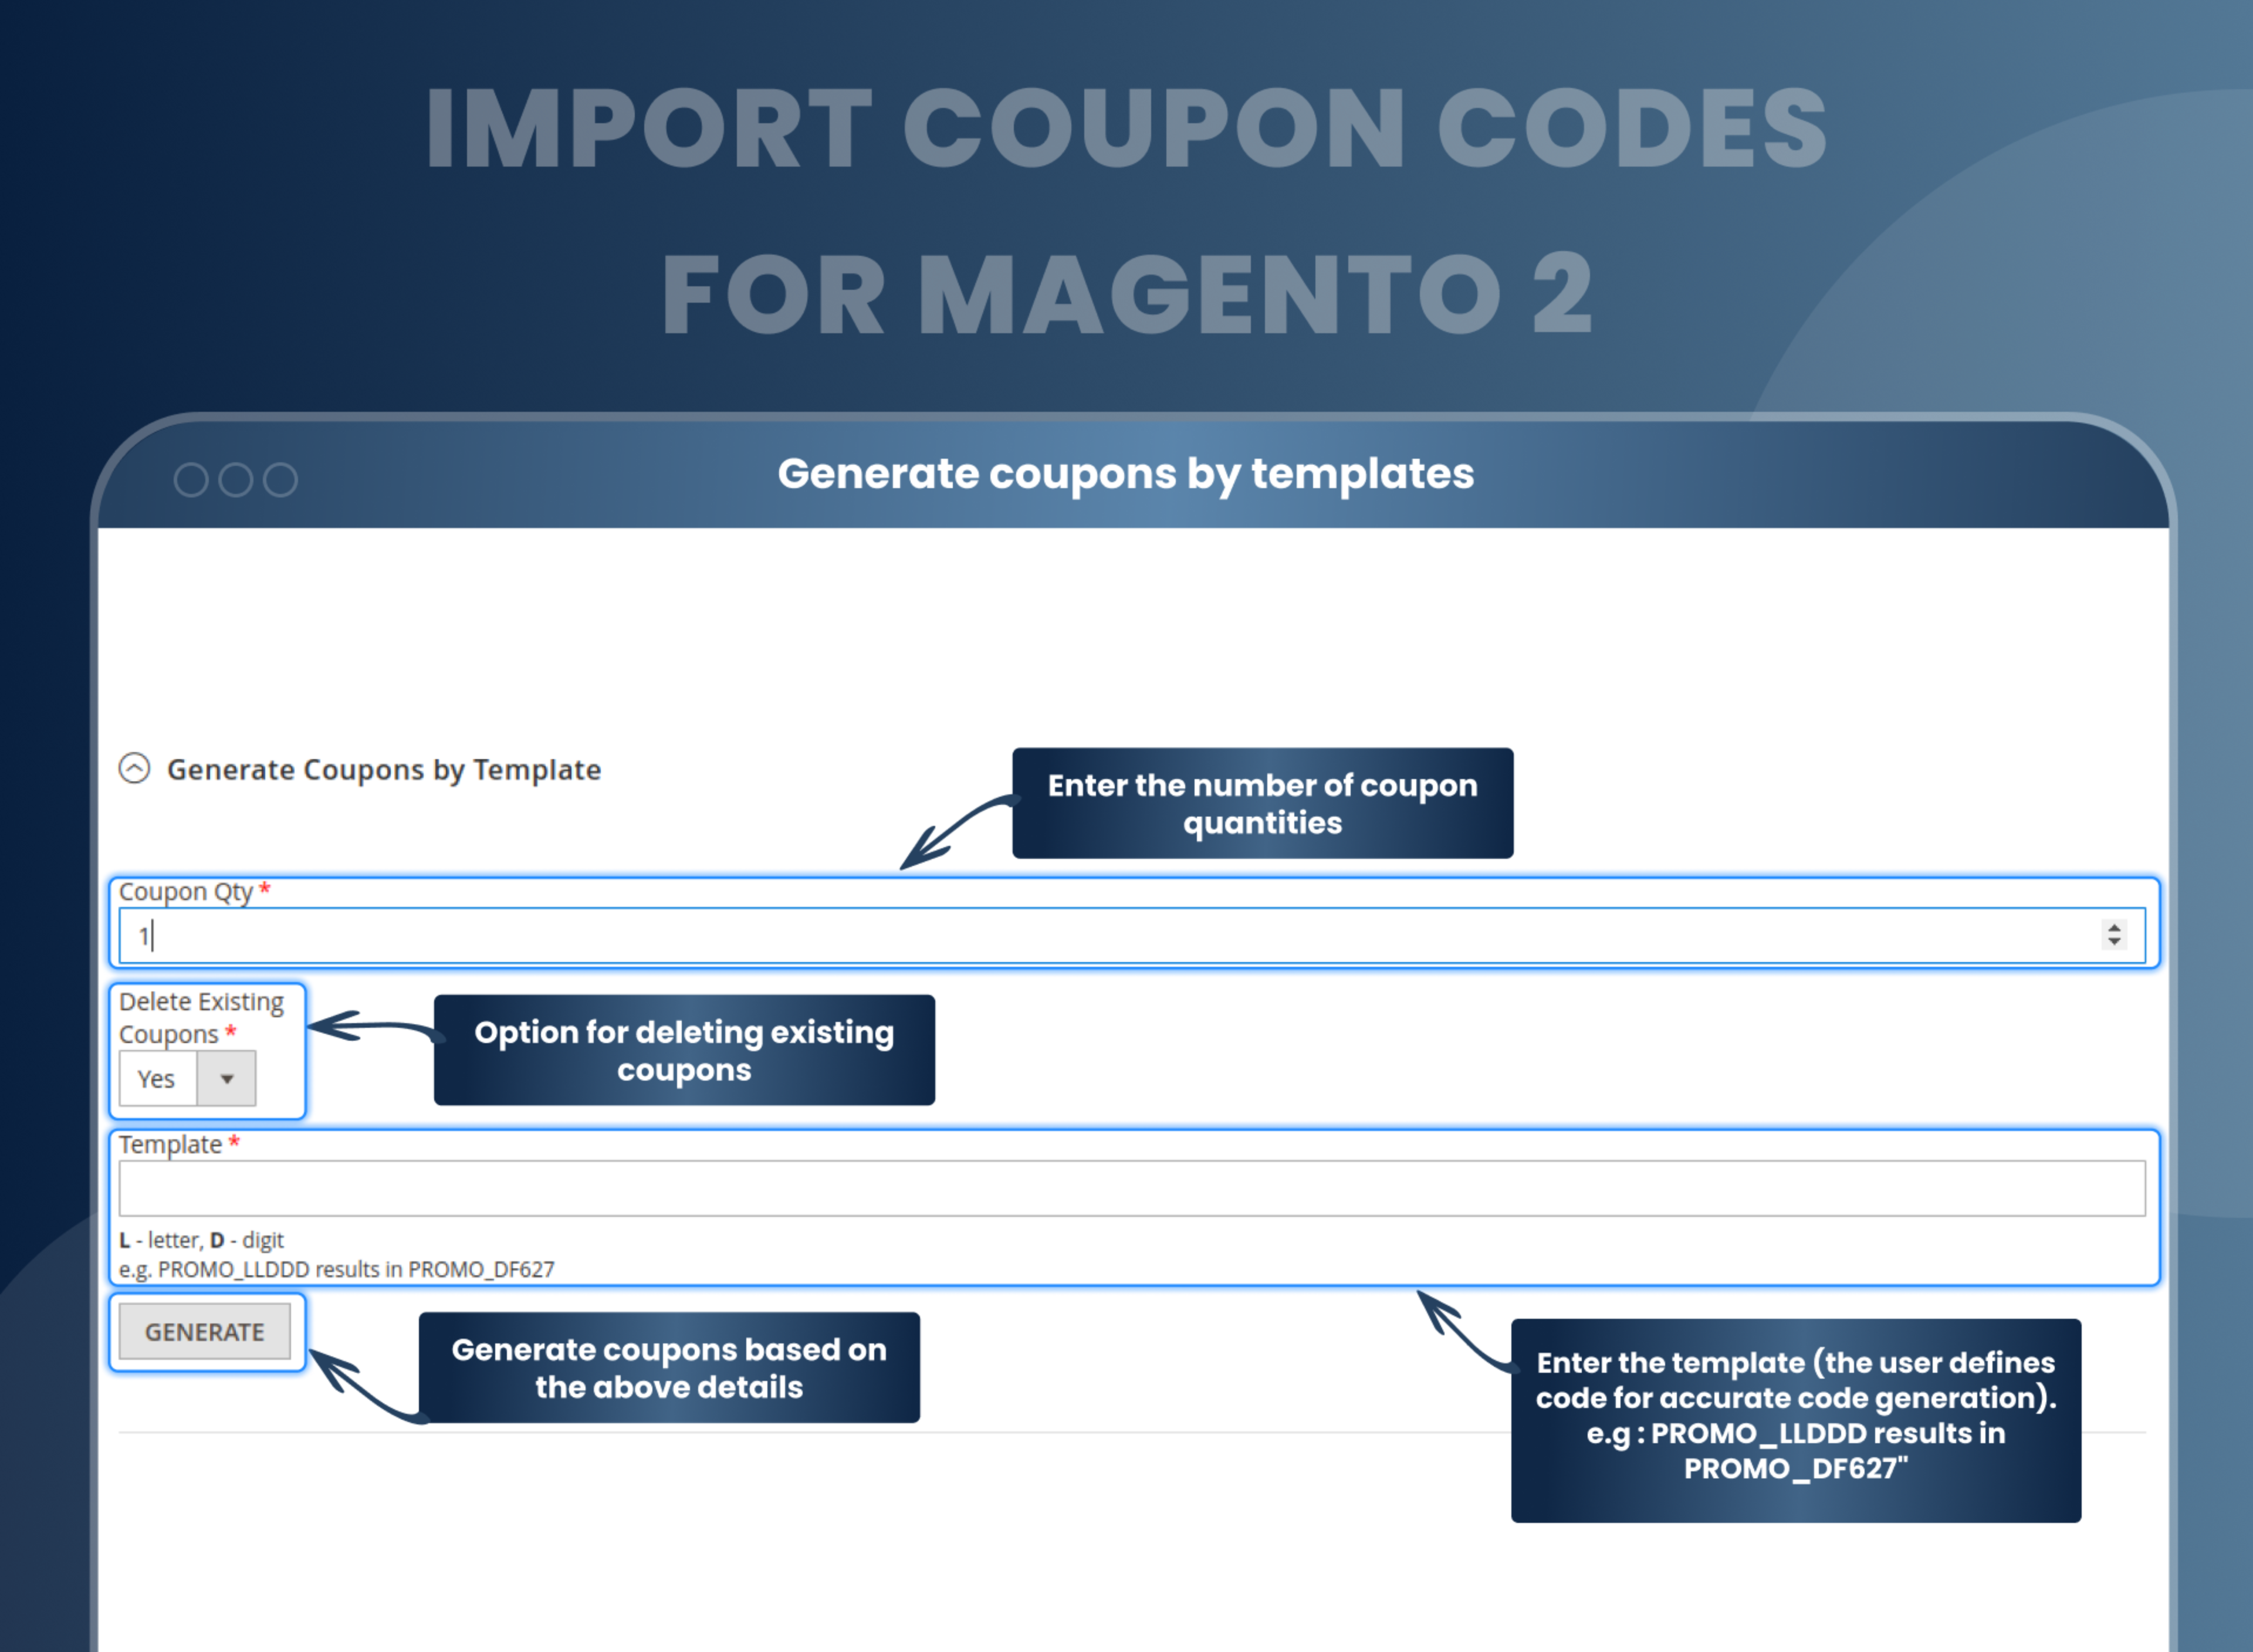 Generate coupons by templates